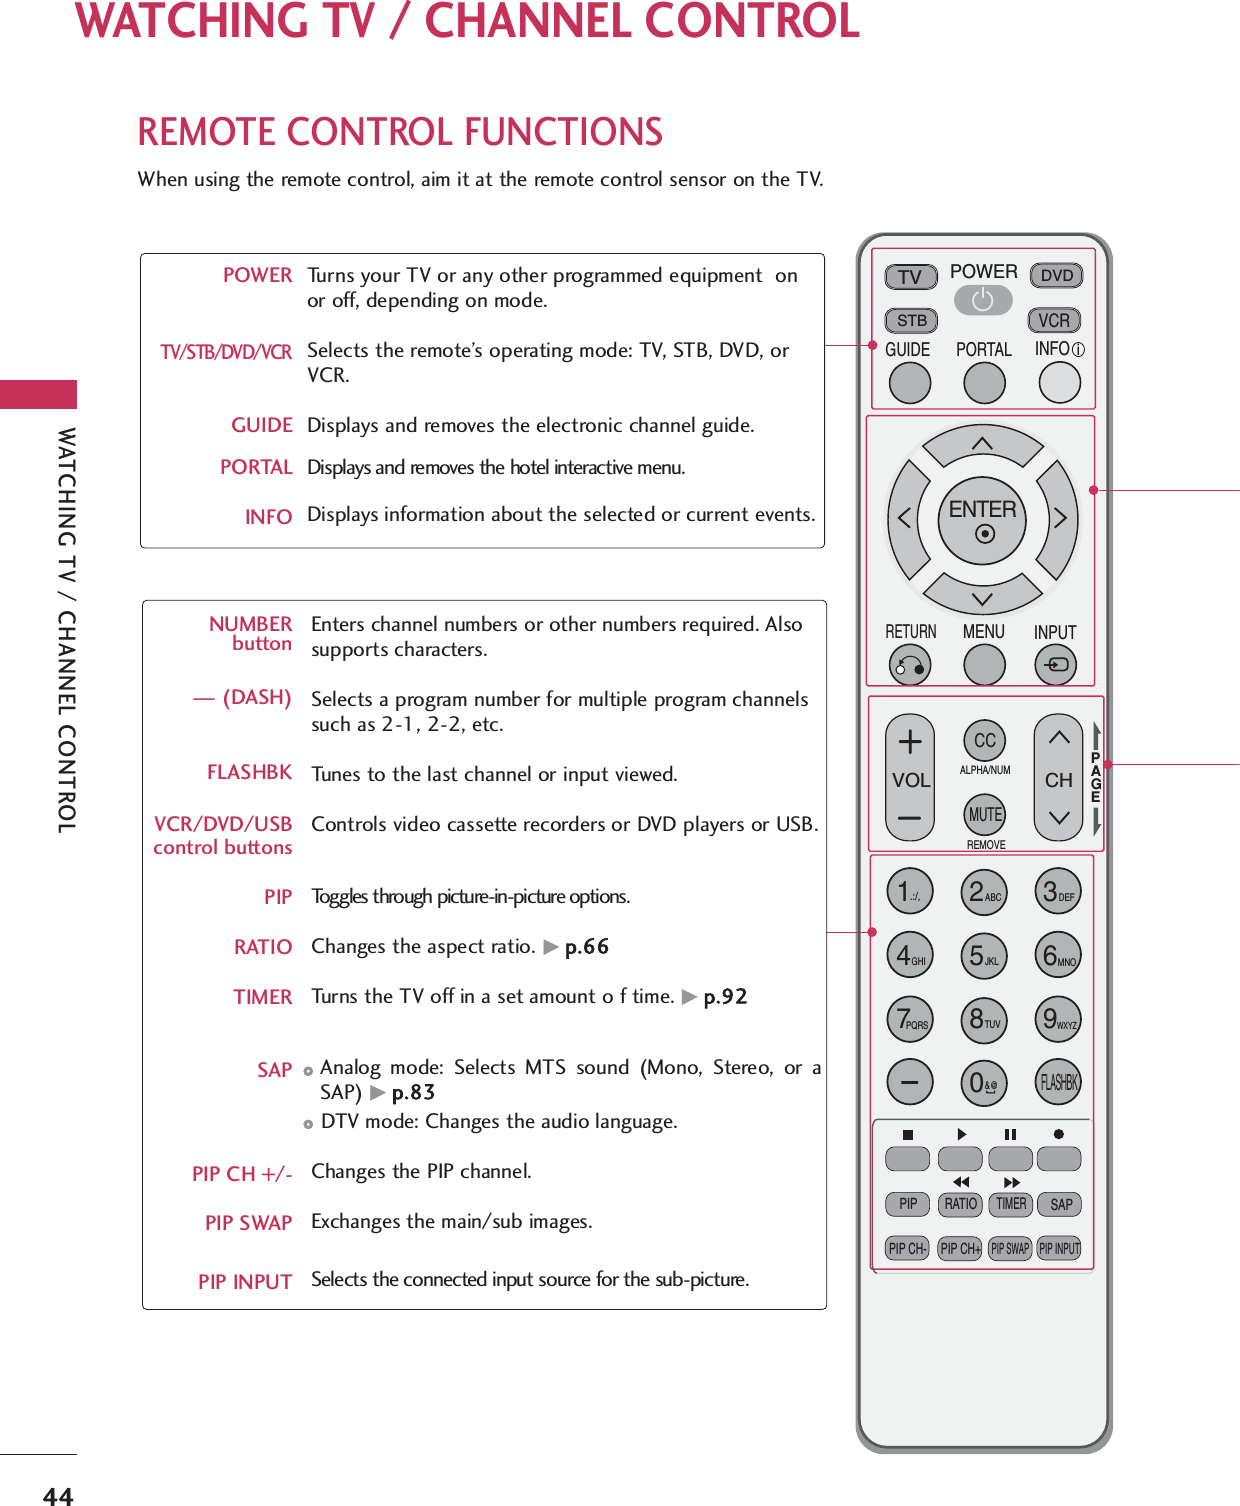 WATCHING TV / CHANNEL CONTROL44REMOTE CONTROL FUNCTIONSWhen using the remote control, aim it at the remote control sensor on the TV.MUTERETURNCCTVPOWERGUIDEPORTALENTER VOL CH1234567809FLASHBKVCRDVDINPUTMENUINFOiSTBPAGEPIP SAPPIP CH- PIP CH+PIP SWAPPIP INPUTALPHA/NUMREMOVERATIOTIMERABC DEFGHIWXYZTUVPQRSMNOJKL&amp;@.:/,POWERTV/STB/DVD/VCRGUIDEPORTALINFOTurns your TV or any other programmed equipment  onor off, depending on mode.Selects the remote’s operating mode: TV, STB, DVD, orVCR. Displays and removes the electronic channel guide.Displays and removes the hotel interactive menu.Displays information about the selected or current events.NUMBER button— (DASH)FLASHBKVCR/DVD/USB  control buttonsPIPRATIOTIMERSAPPIP CH +/-PIP SWAPPIP INPUTEnters channel numbers or other numbers required. Alsosupports characters.Selects a program number for multiple program channelssuch as 2-1, 2-2, etc.Tunes to the last channel or input viewed.Controls video cassette recorders or DVD players or USB.Toggles through picture-in-picture options. Changes the aspect ratio. Gp.66Turns the TV off in a set amount o f time. Gp.92Analog mode: Selects MTS sound (Mono, Stereo, or aSAP) Gp.83DTV mode: Changes the audio language.Changes the PIP channel. Exchanges the main/sub images.Selects the connected input source for the sub-picture.WATCHING TV / CHANNEL CONTROL